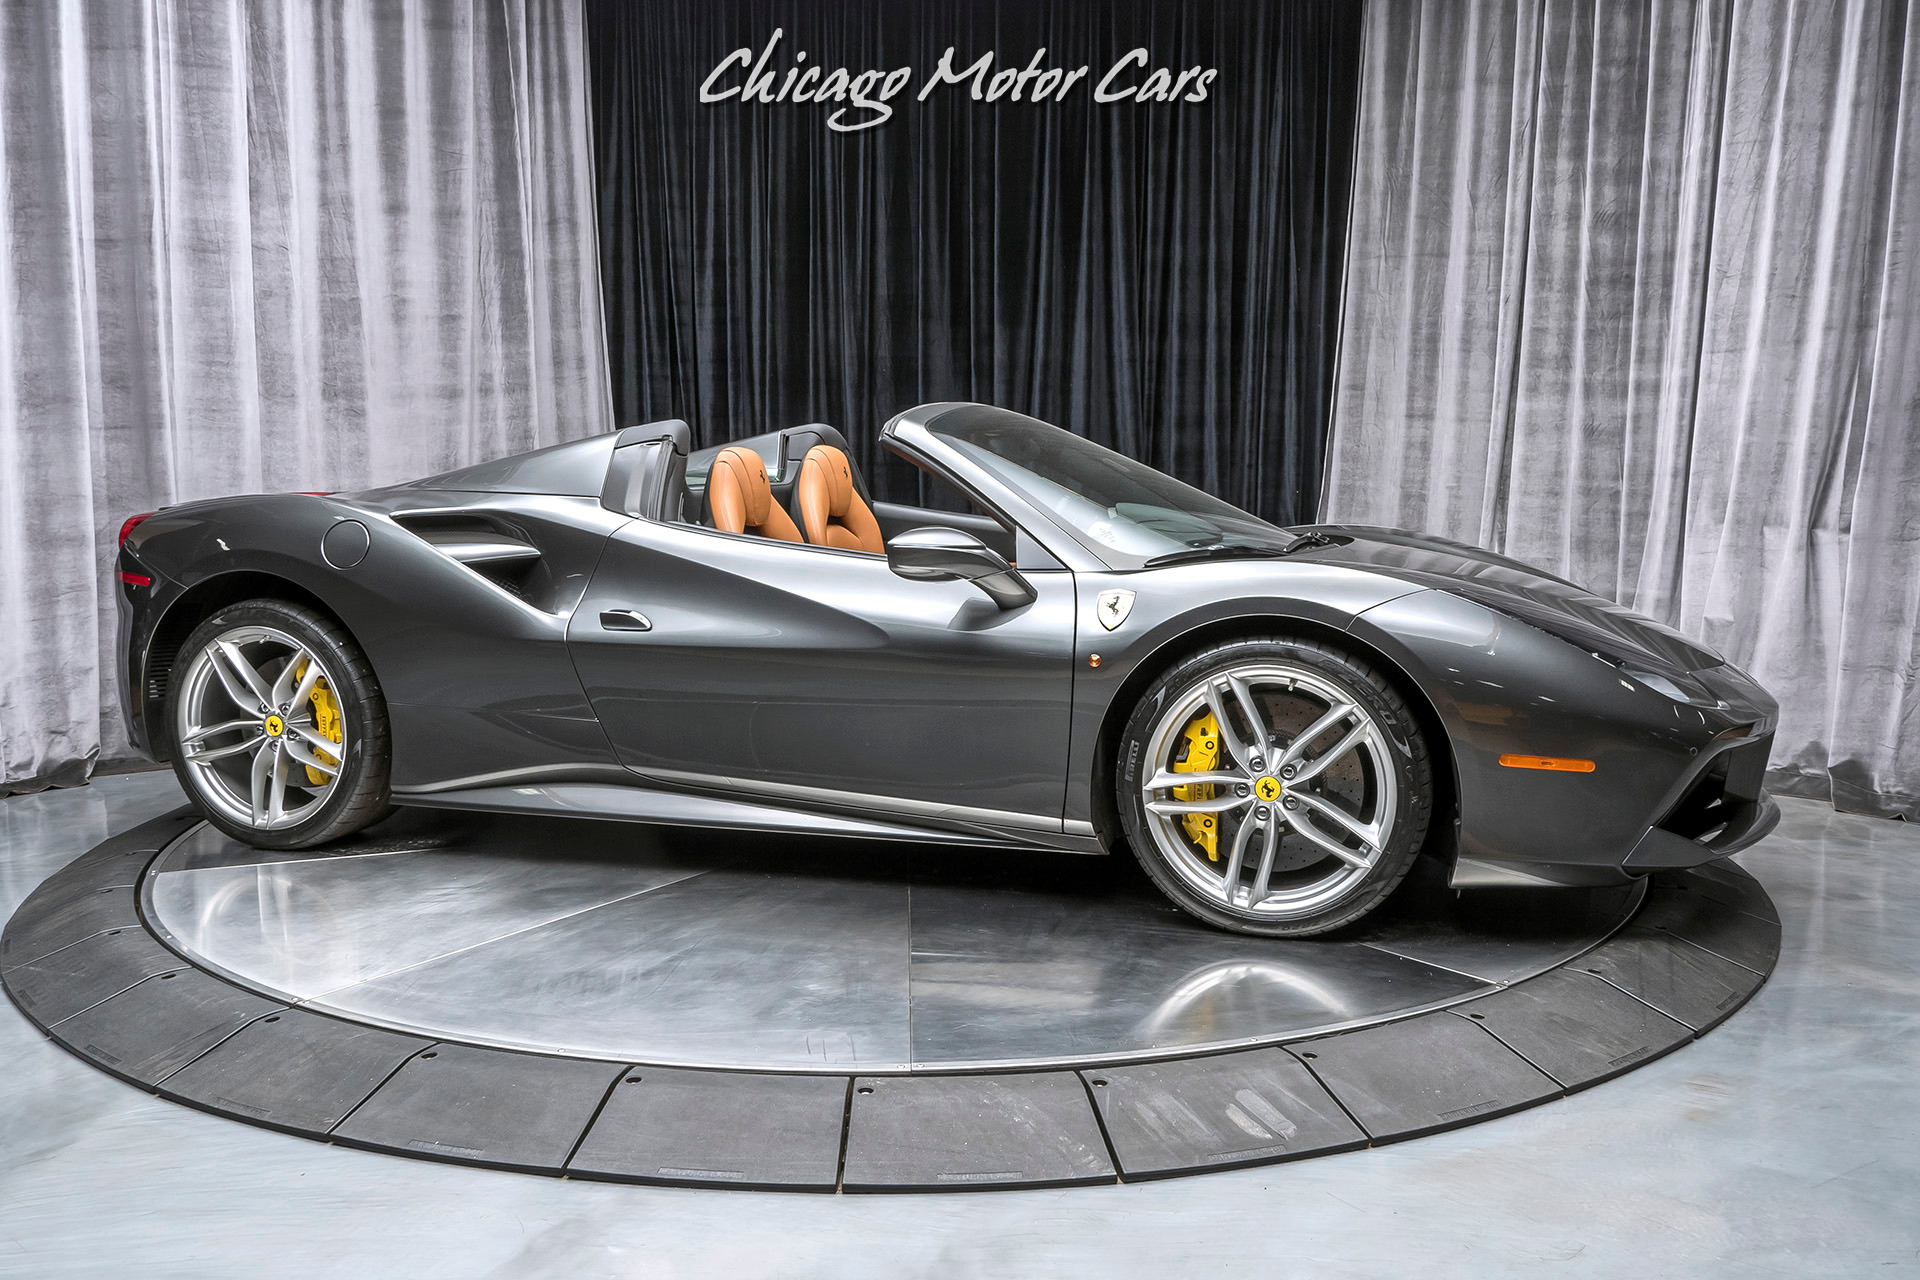 Used-2016-Ferrari-488-Spider-LOADED-THOUSAND-in-FACTORY-OPTIONS